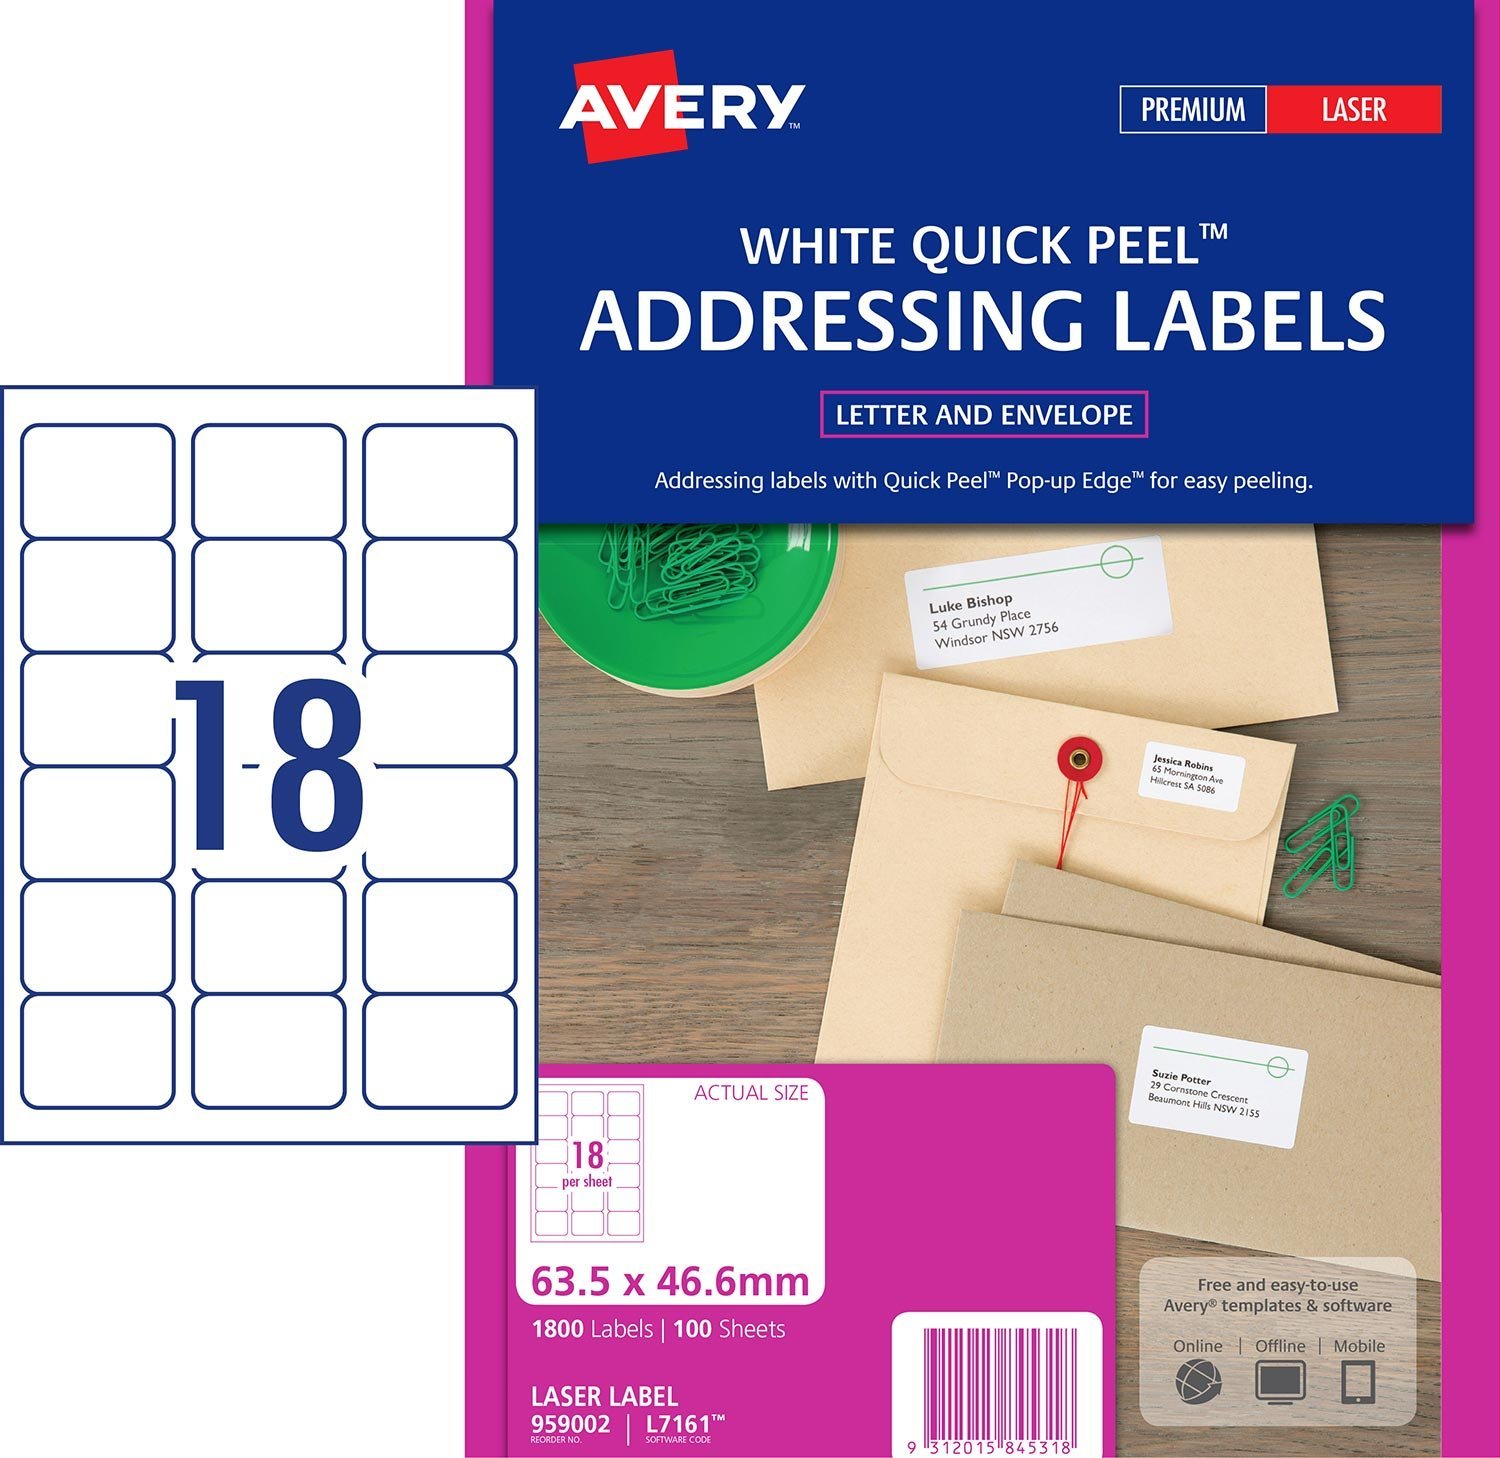 avery-l7161-laser-address-labels-white-18-per-page-100-pack-959002